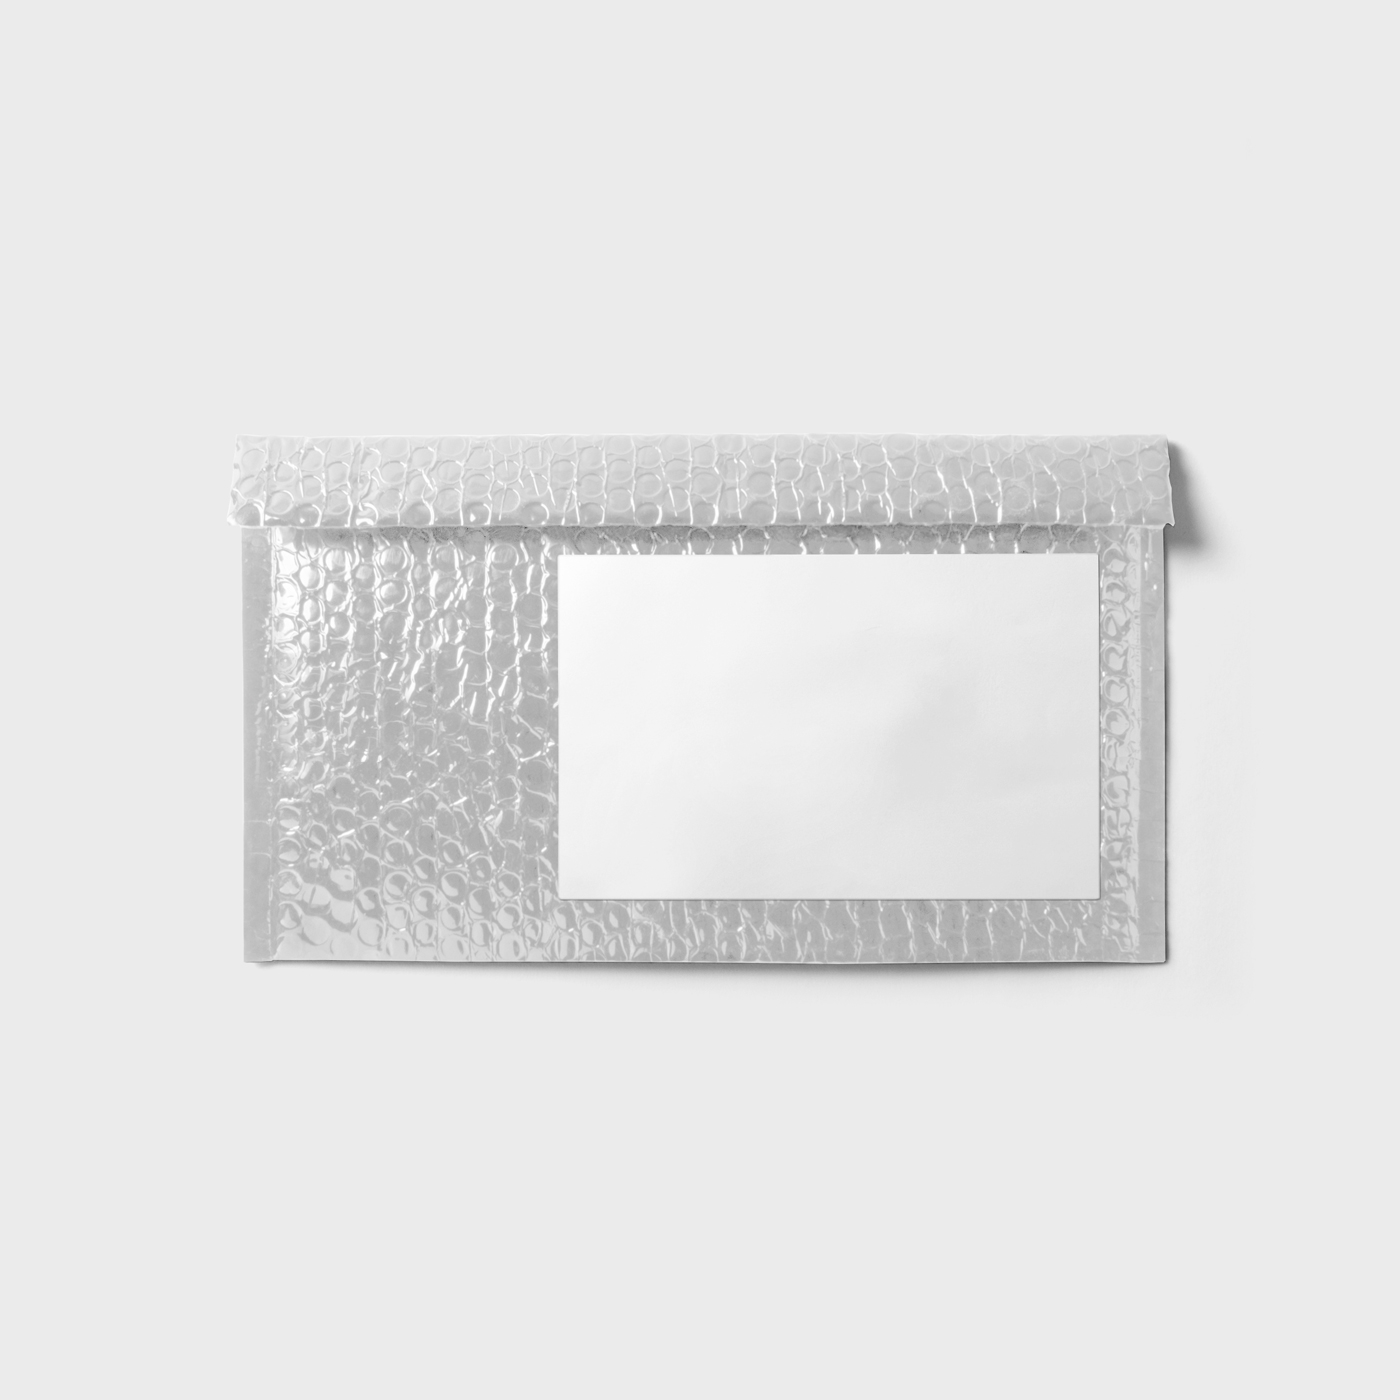 Front View of Classy Small Bubble Envelope Mockup FREE PSD